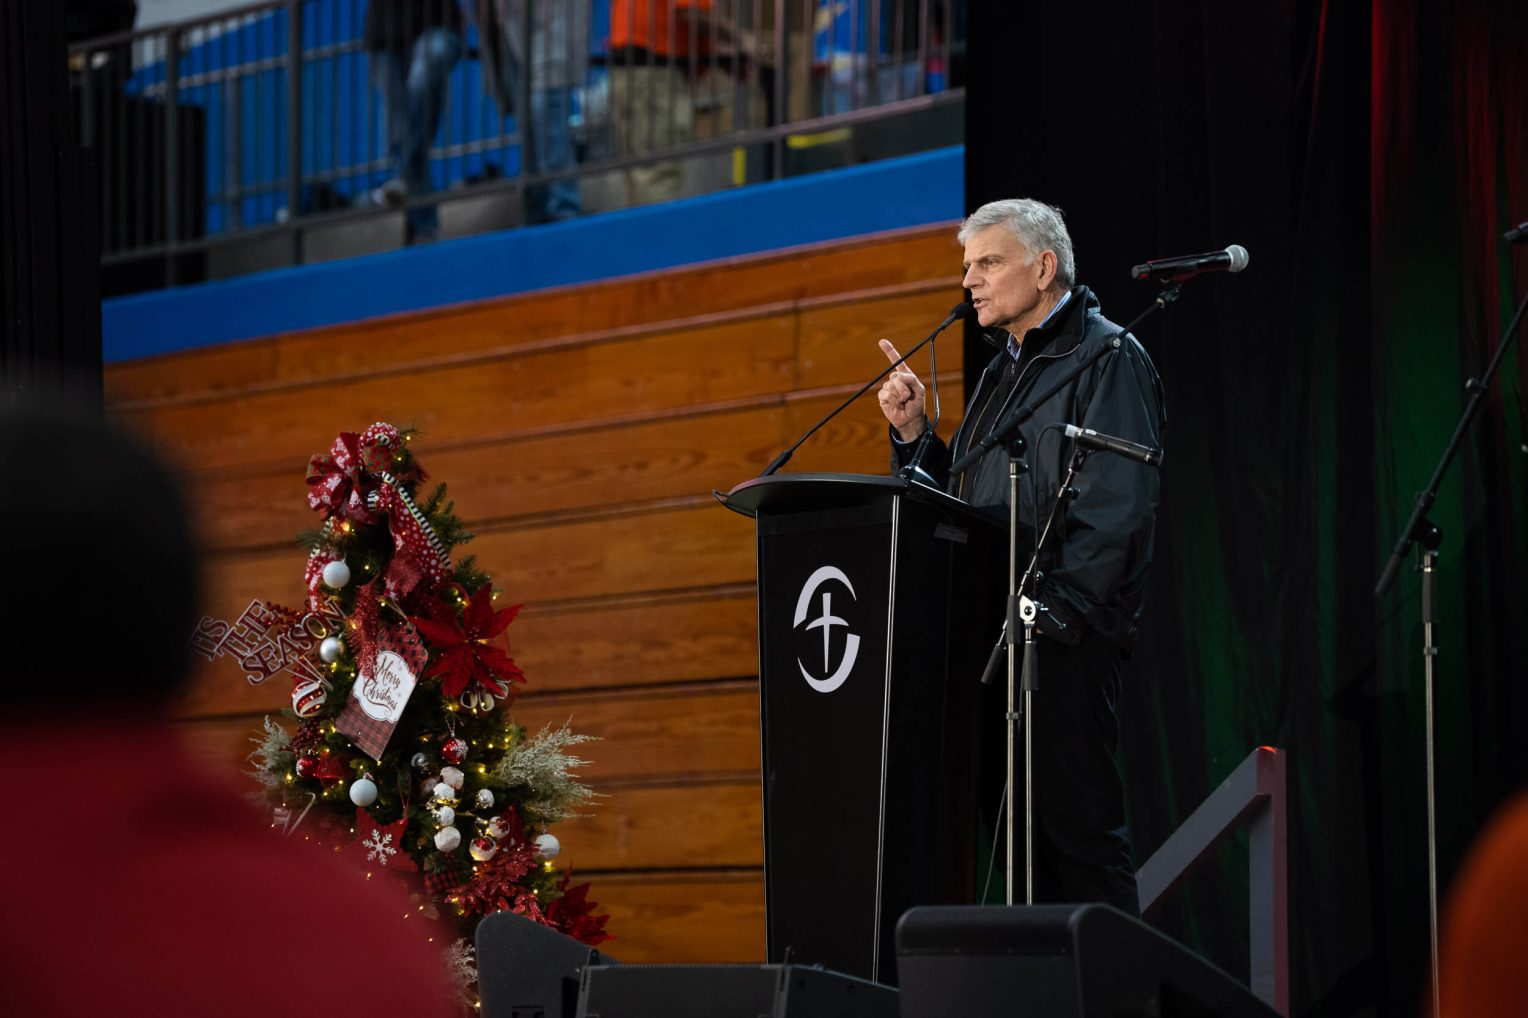 Franklin Graham delivered a message of hope in Mayfield last Christmas Eve.